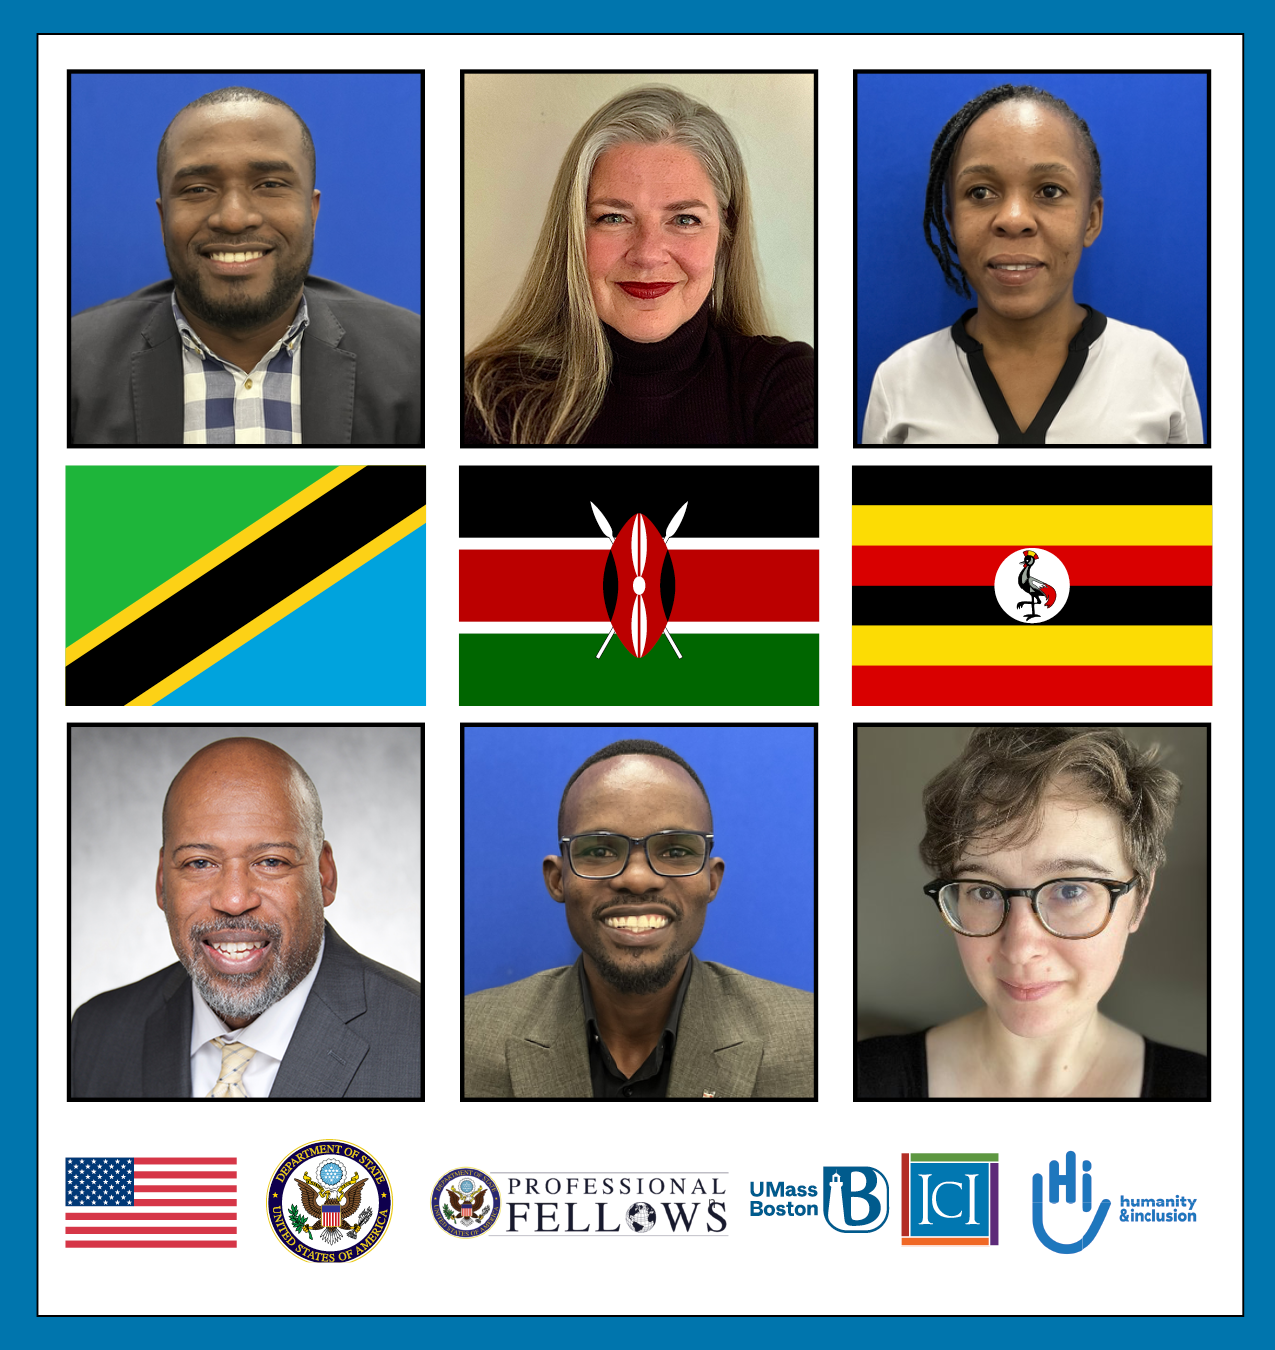 Profile pictures of six individuals, three Americans and three Africans, are aligned with the Tanzanian, Kenyan, and Ugandan flags in the center.